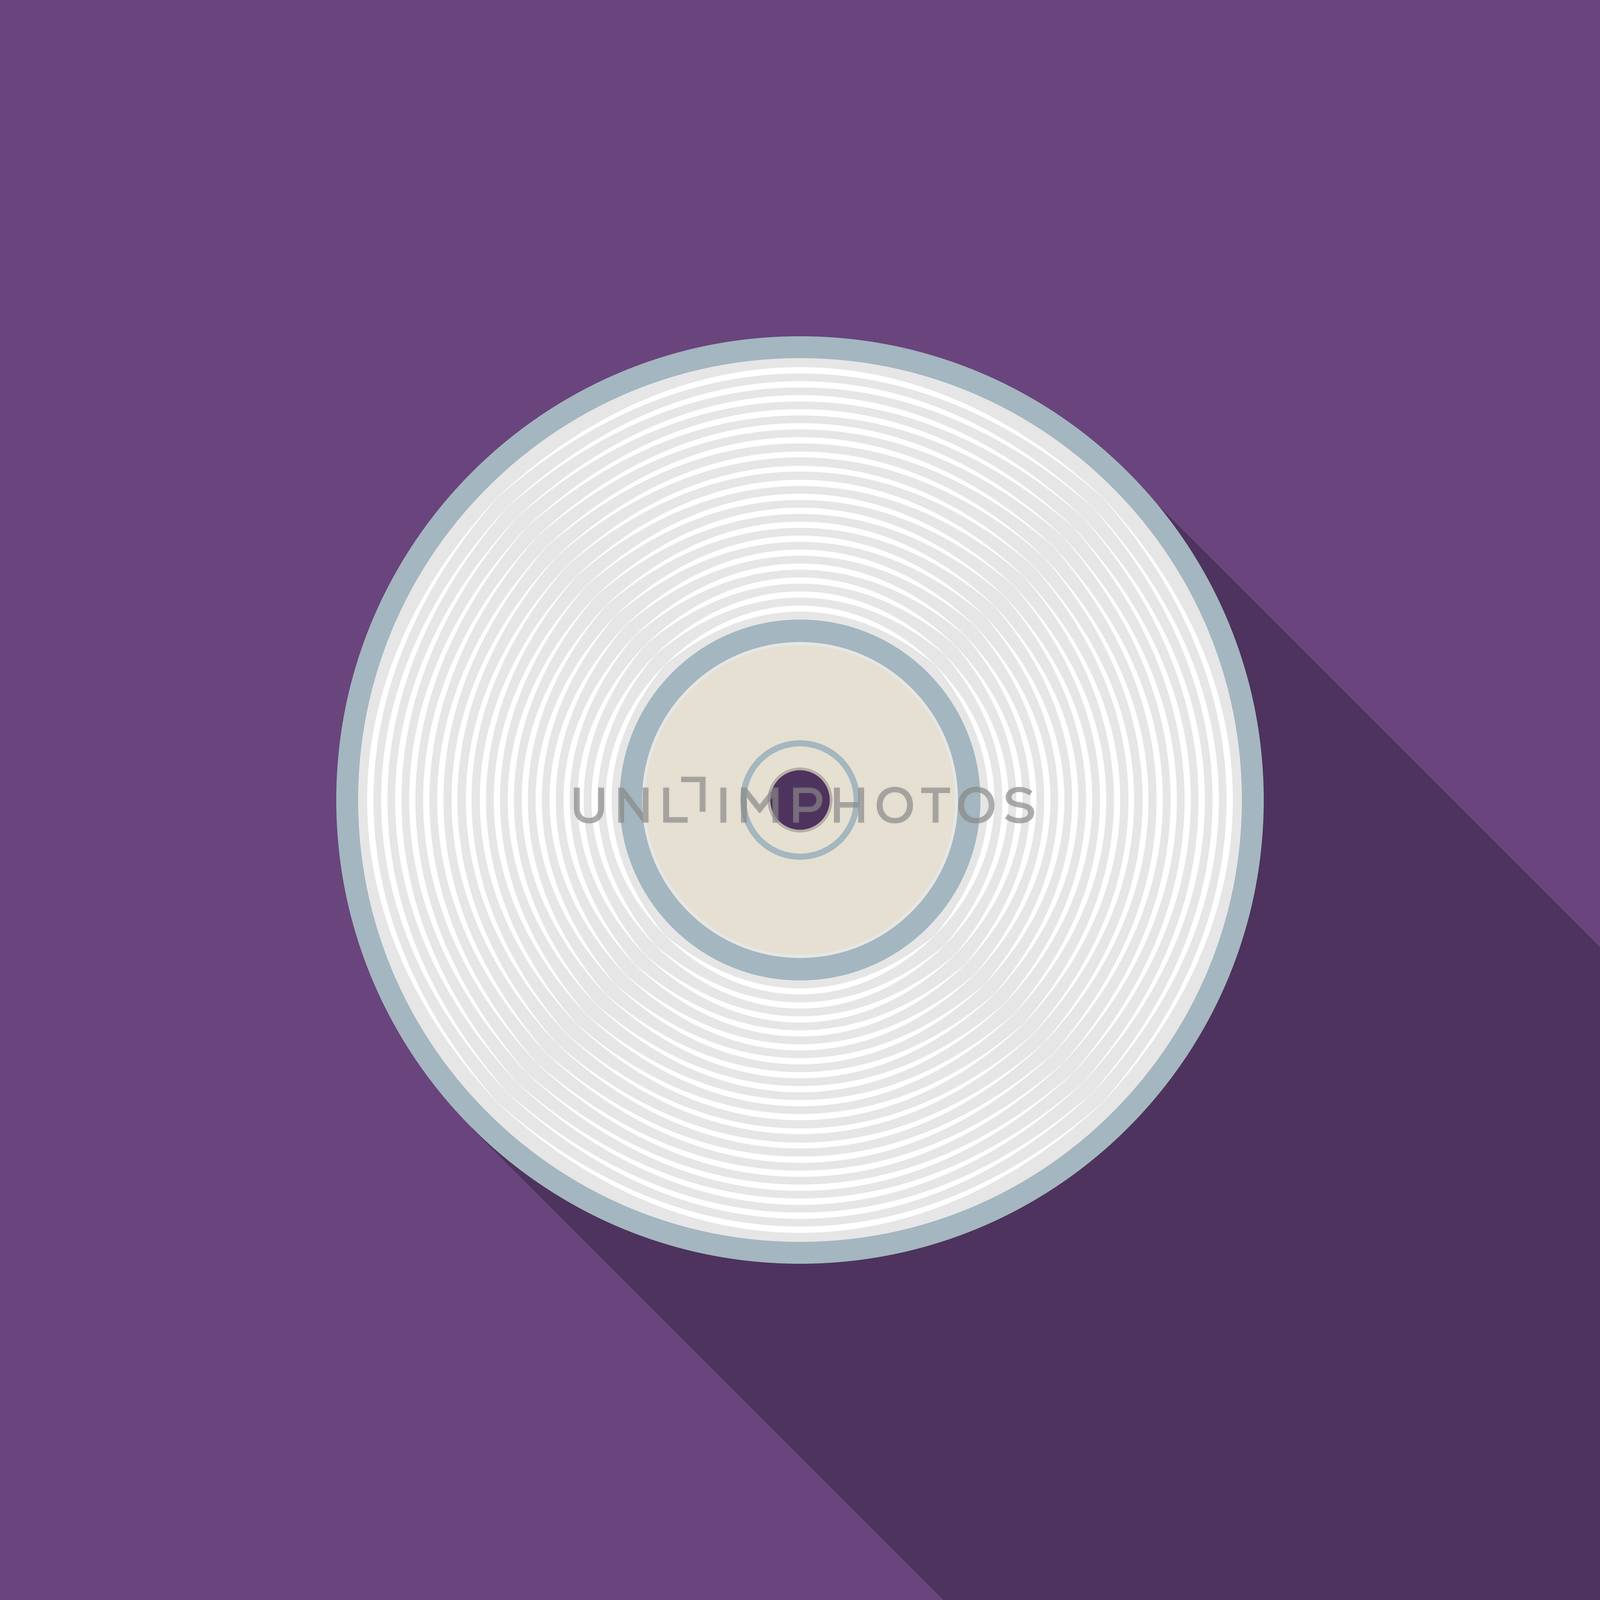 Flat design vector compact disc icon with long shadow.